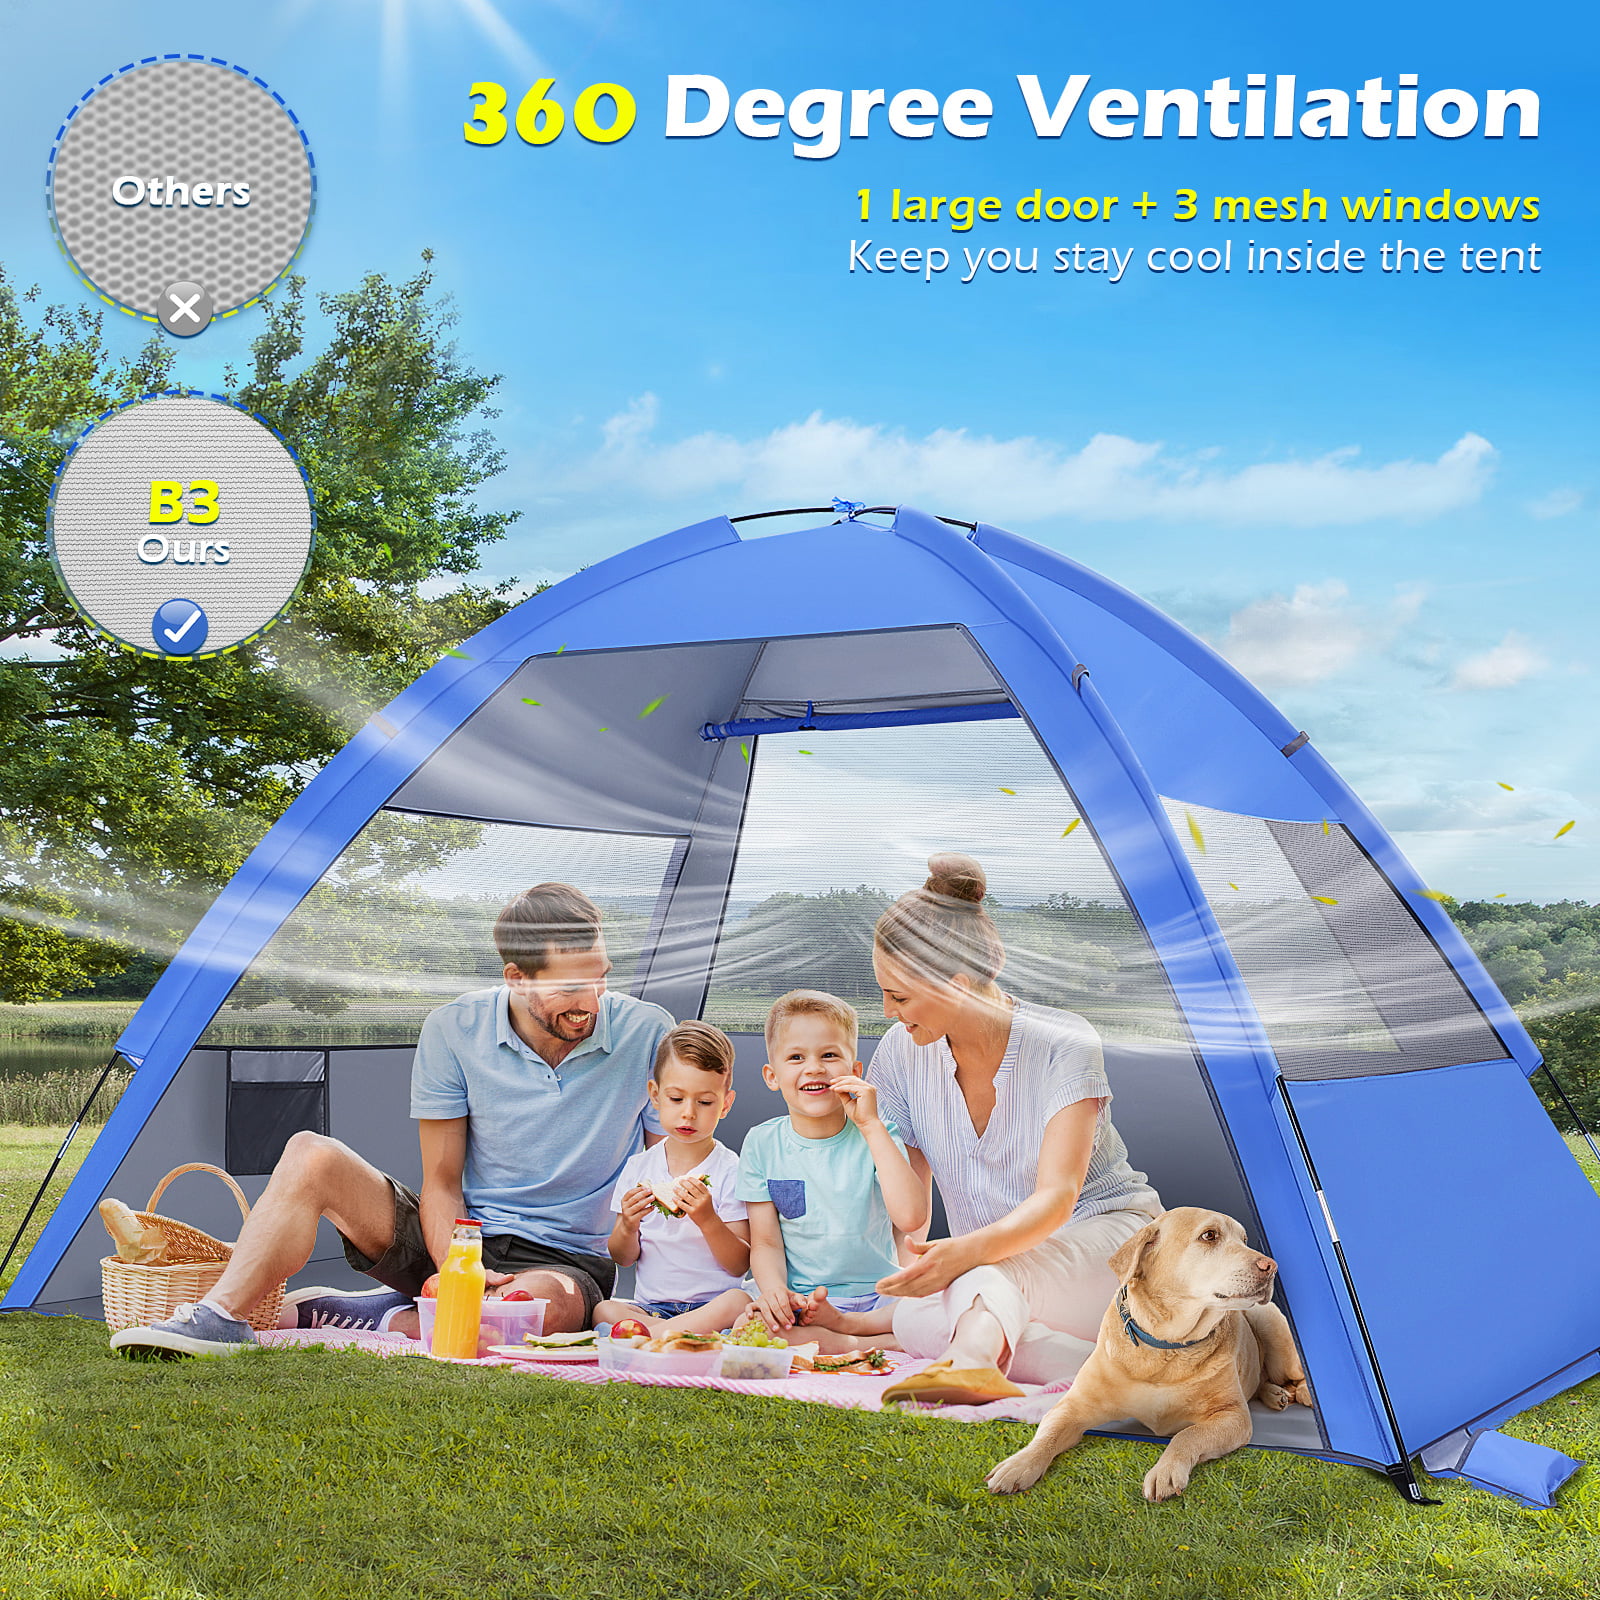 4 Person Pop Up Beach Tent UV Sun Protection UPF 50 Waterproof Shelter W/ Bag 